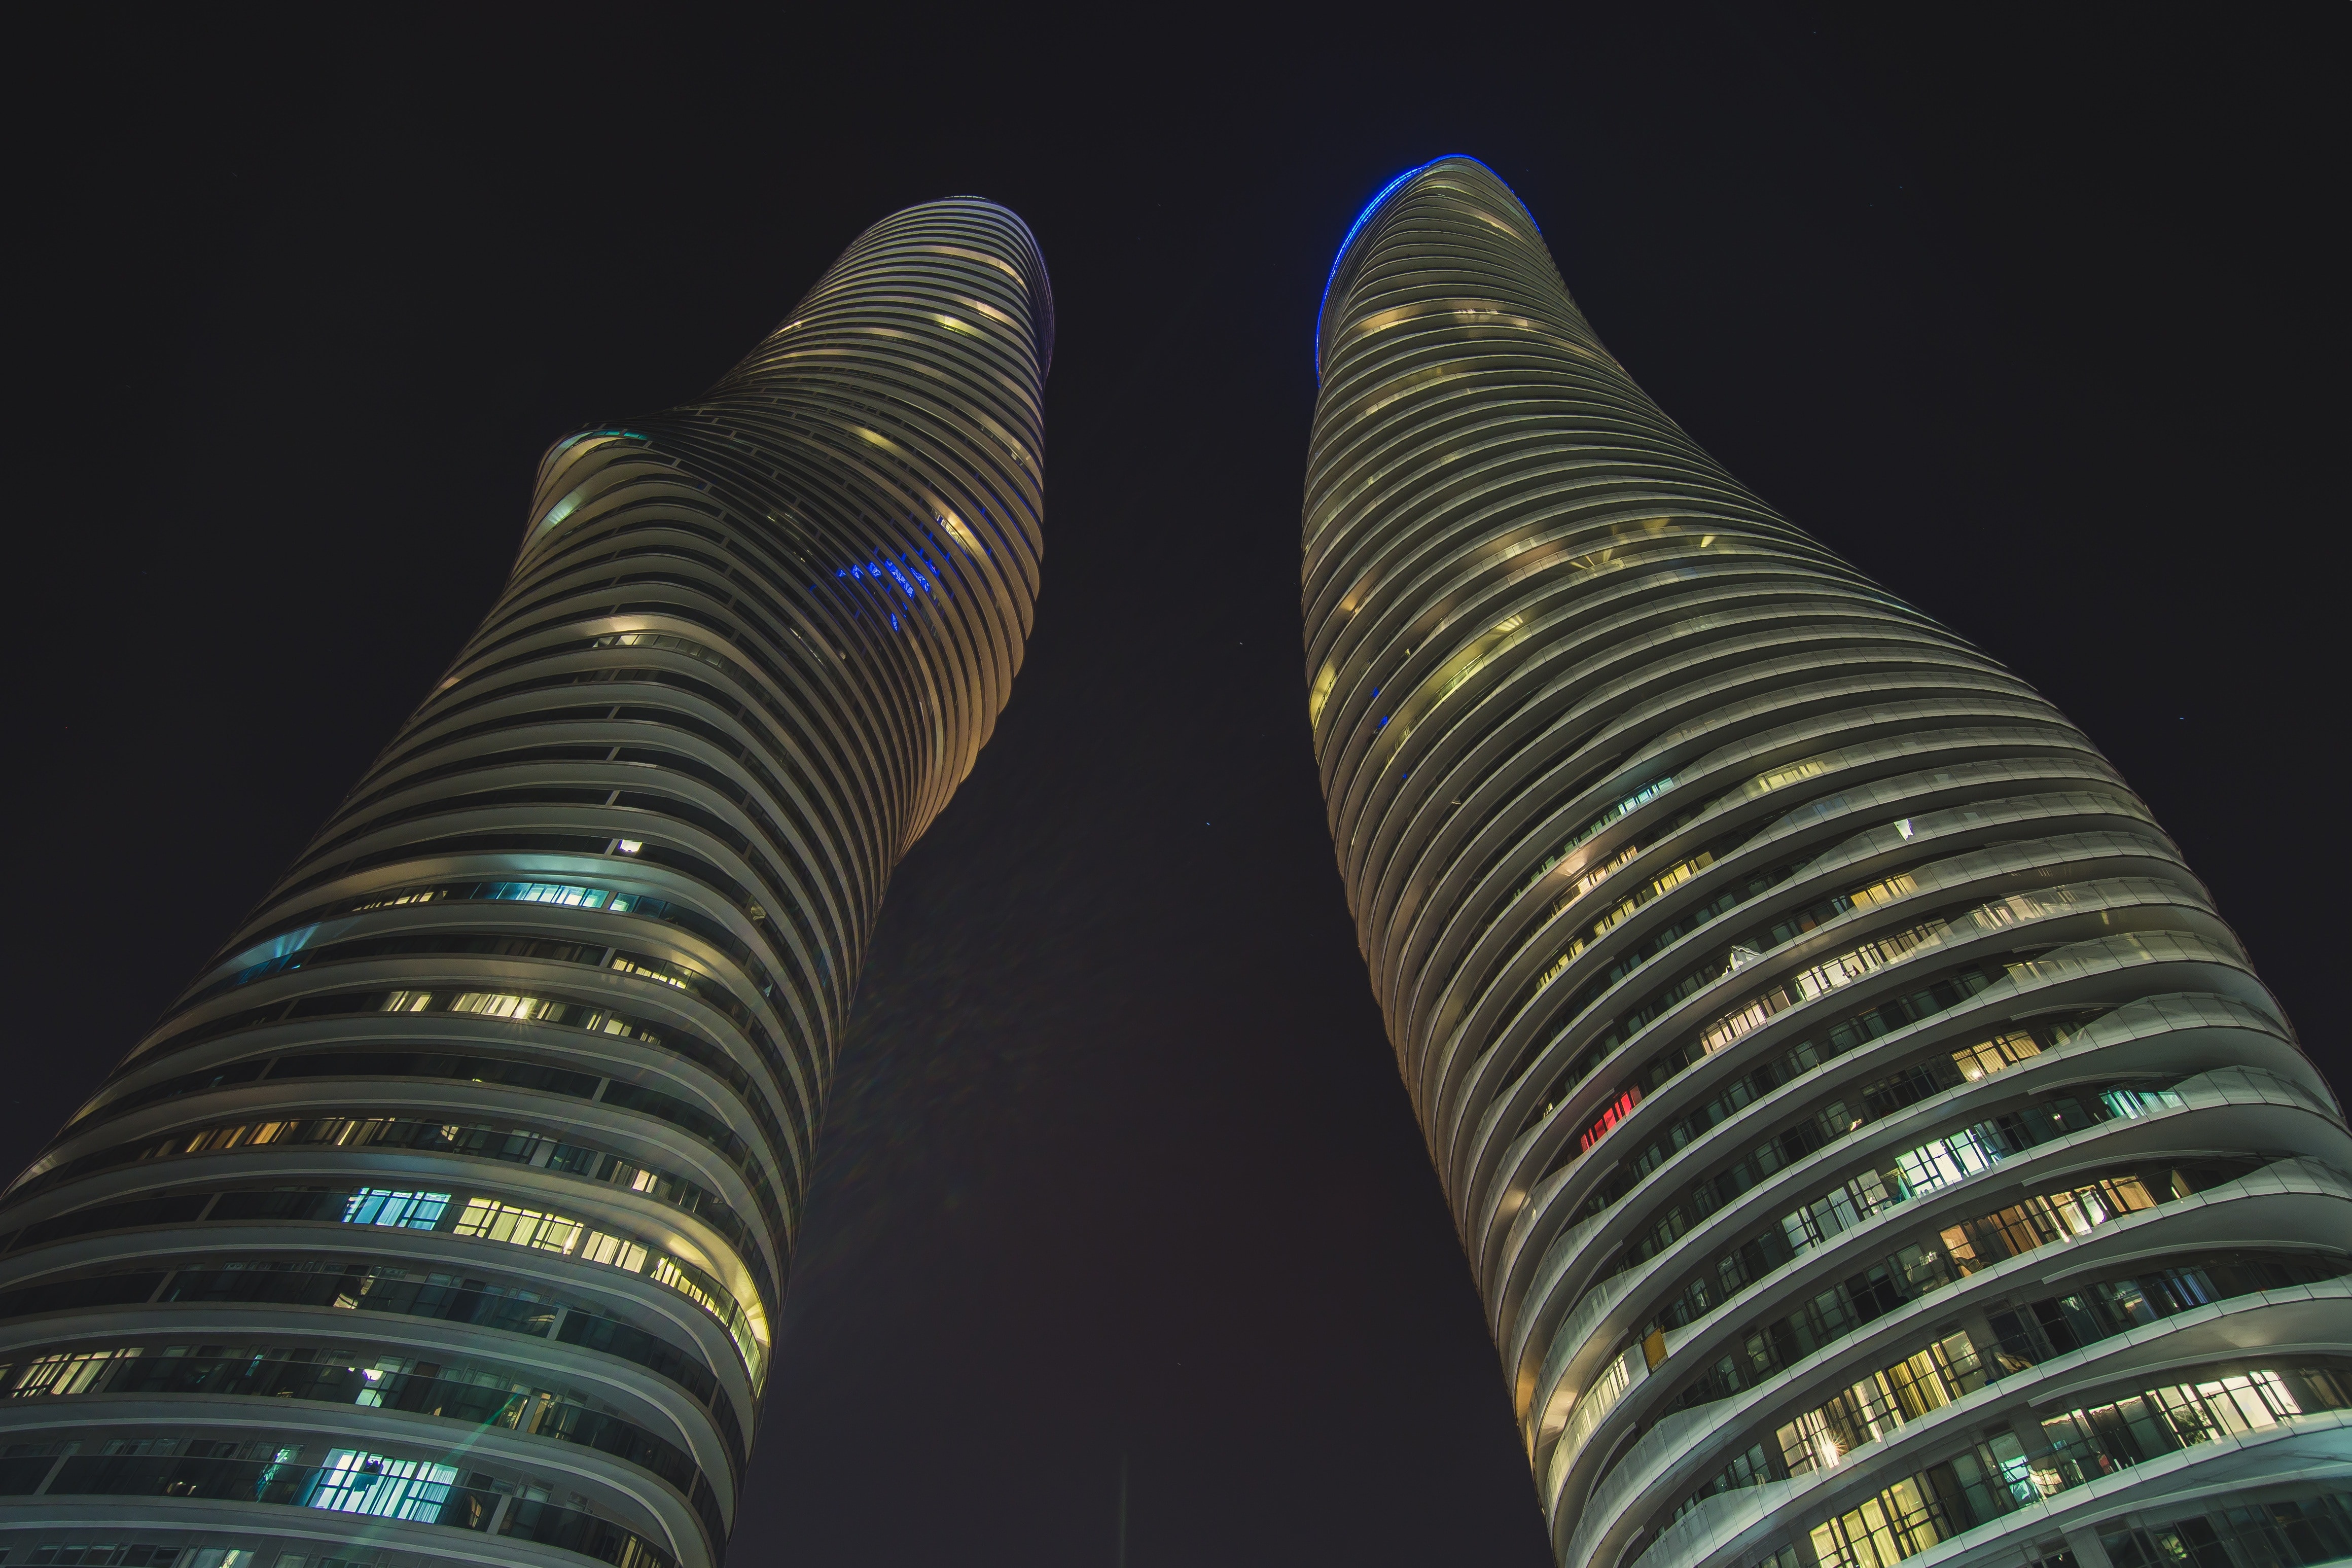 2 spiral tall buildings